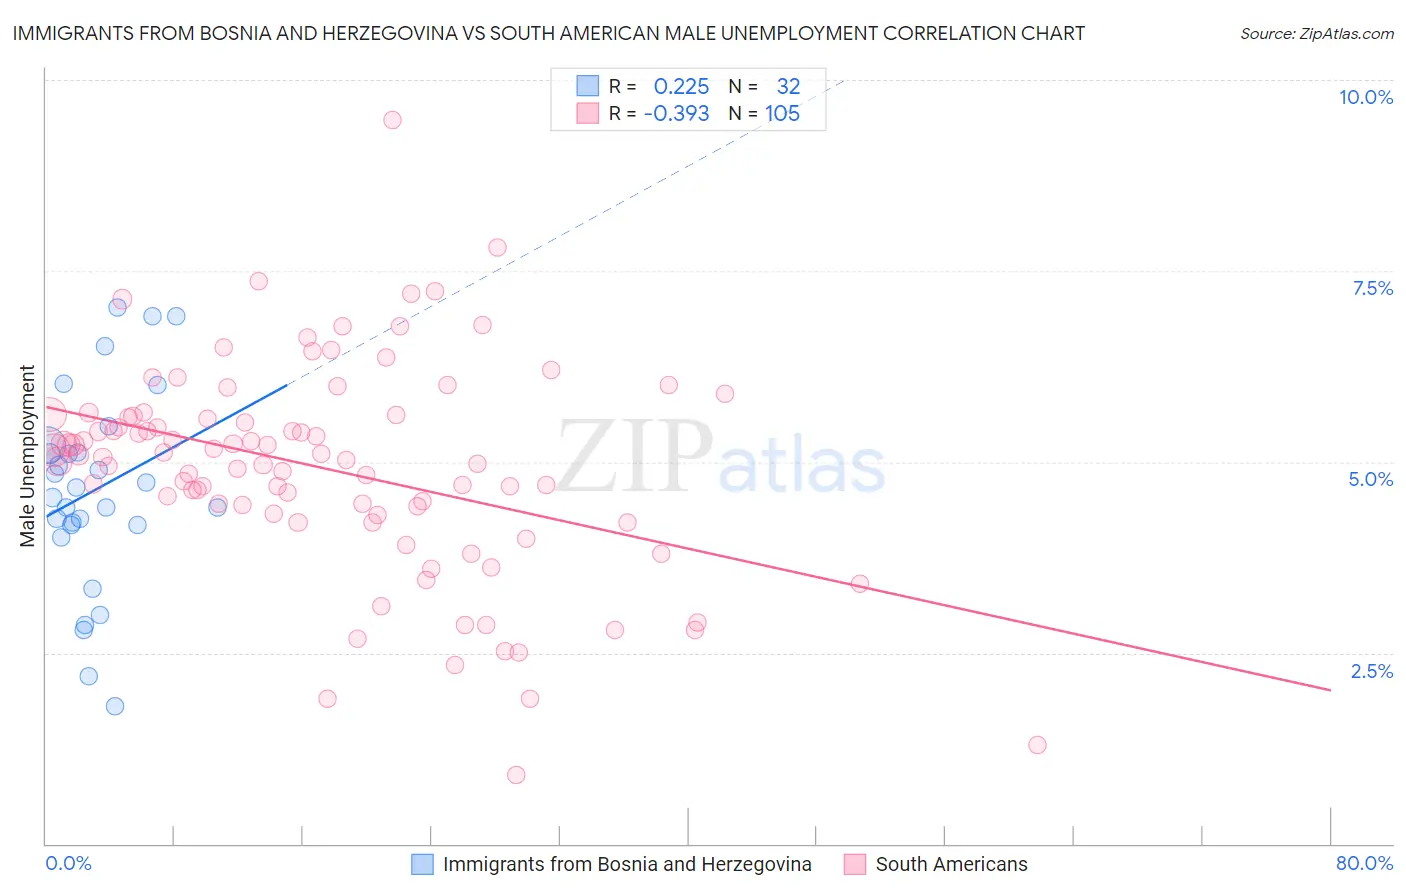 Immigrants from Bosnia and Herzegovina vs South American Male Unemployment